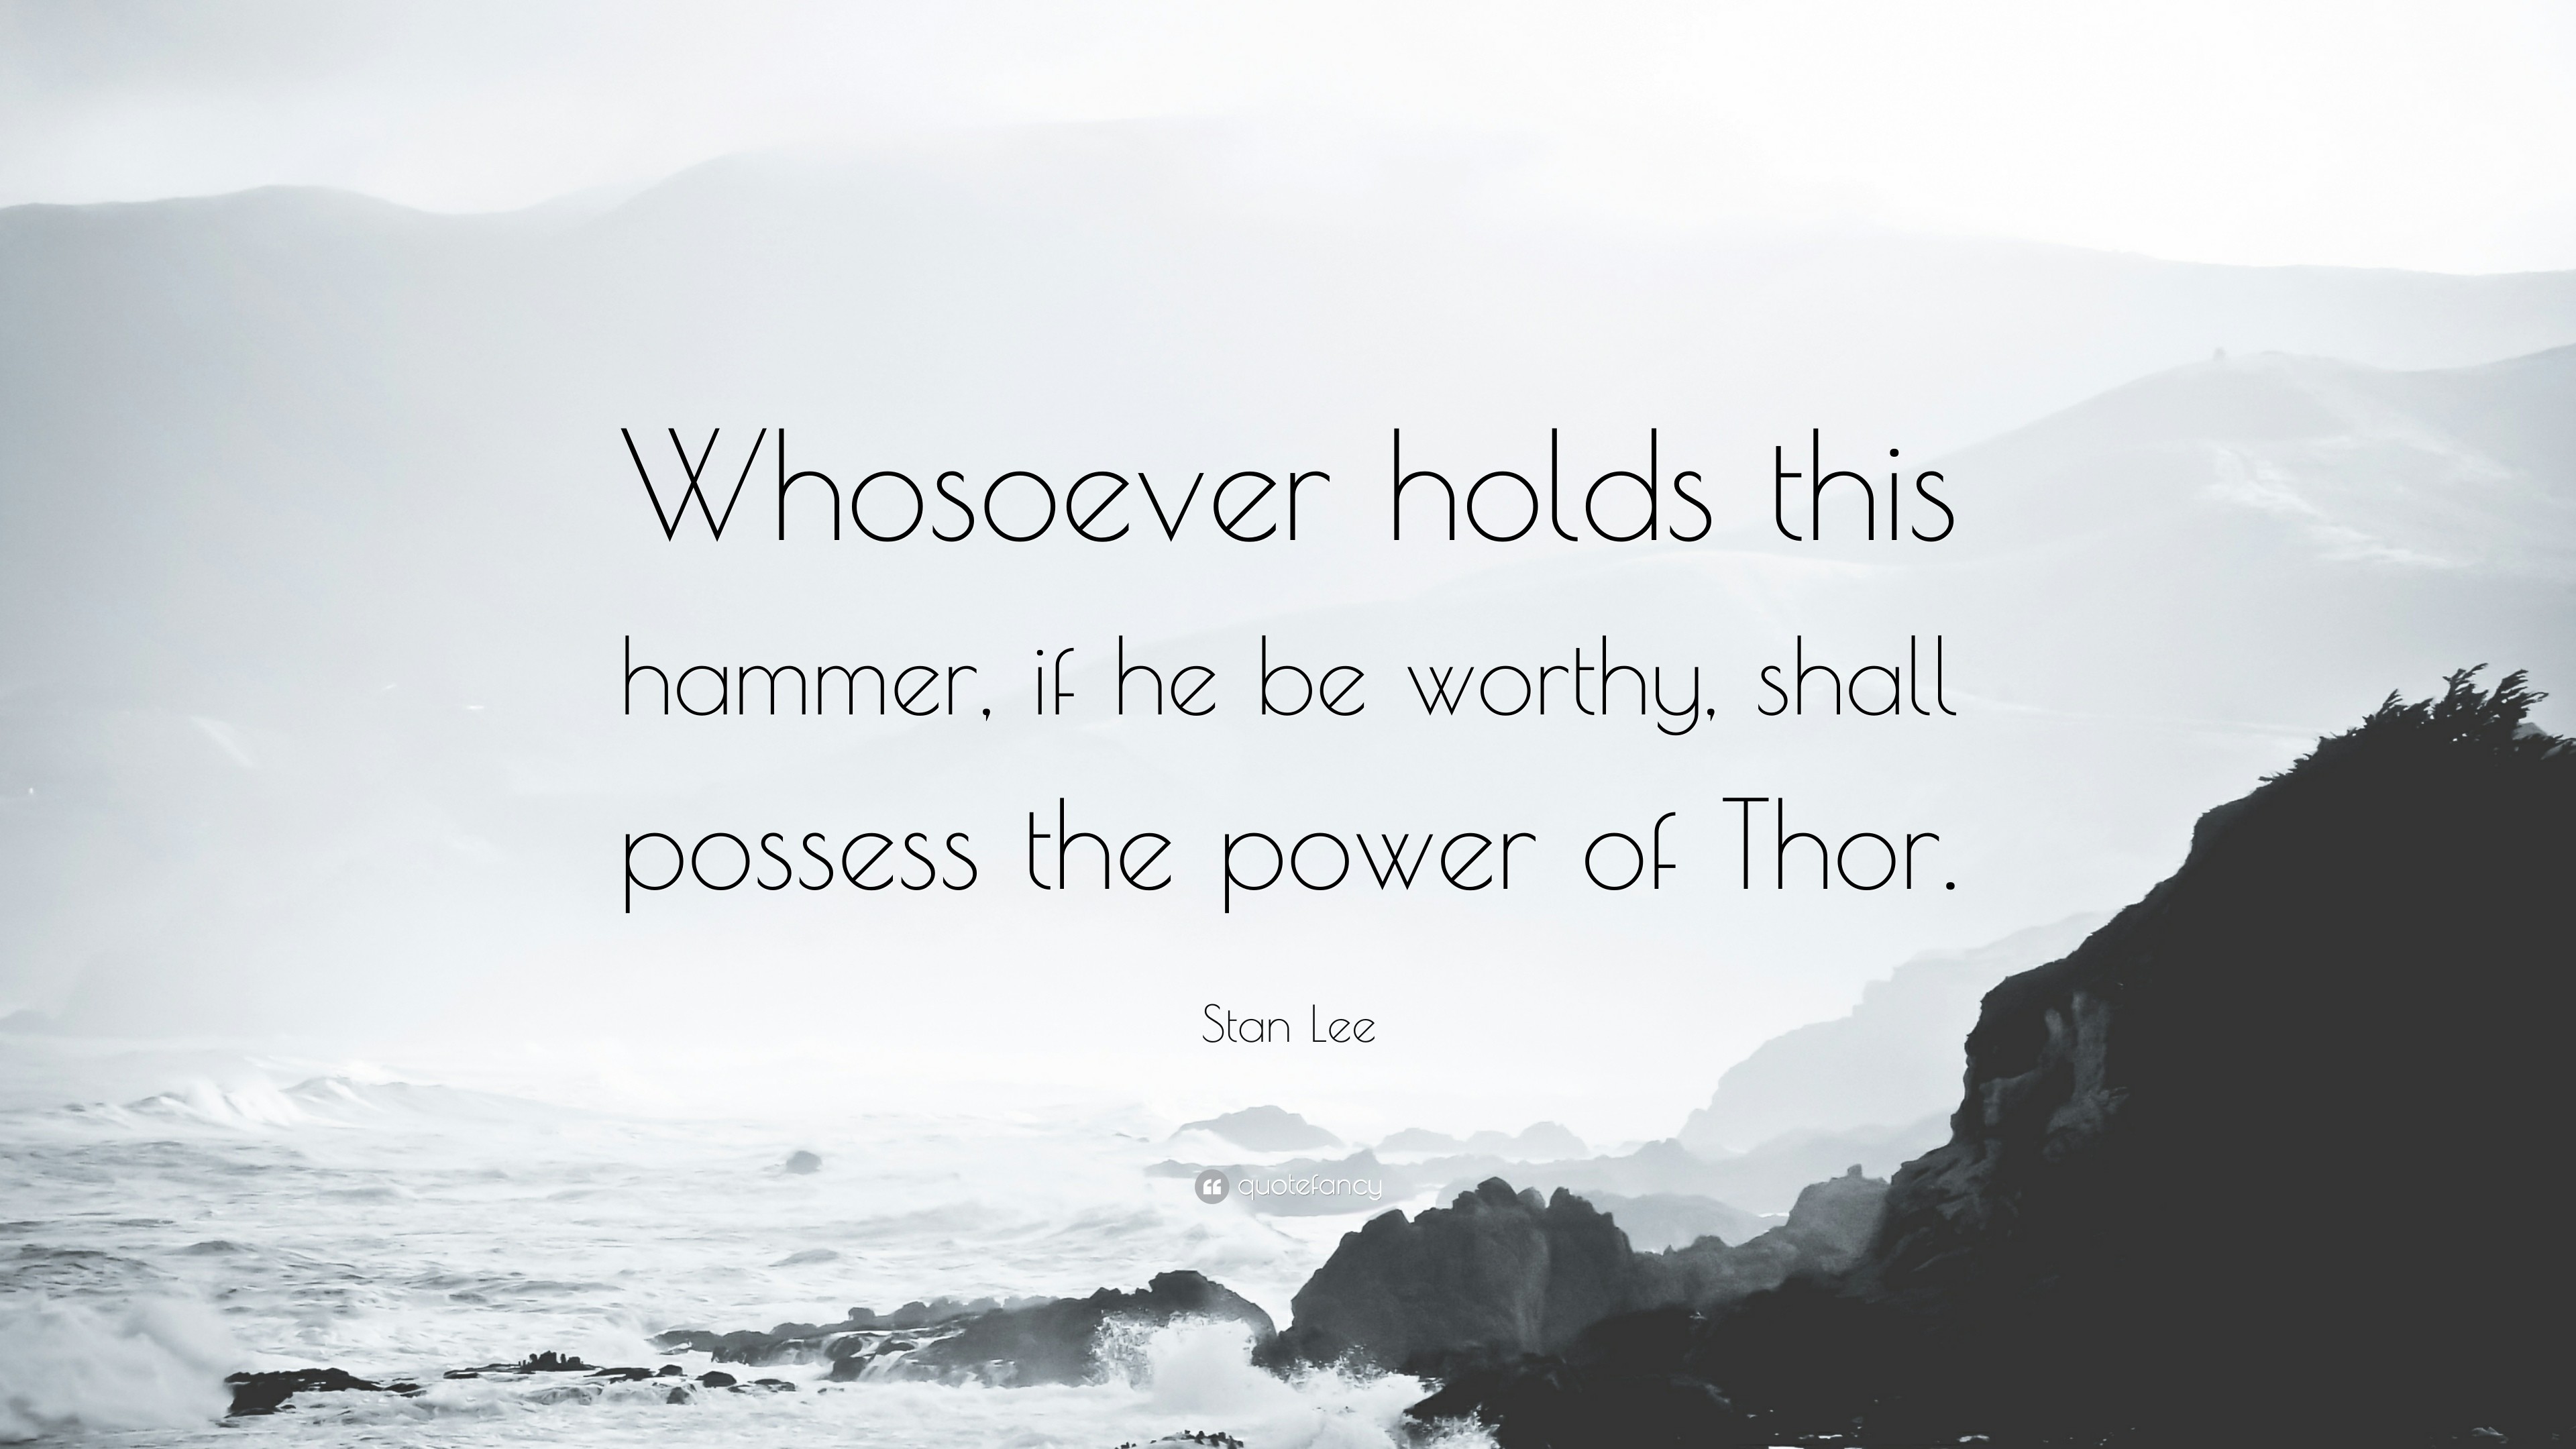 3840x2160 Stan Lee Quote: “Whosoever holds this hammer, if he be worthy, shall